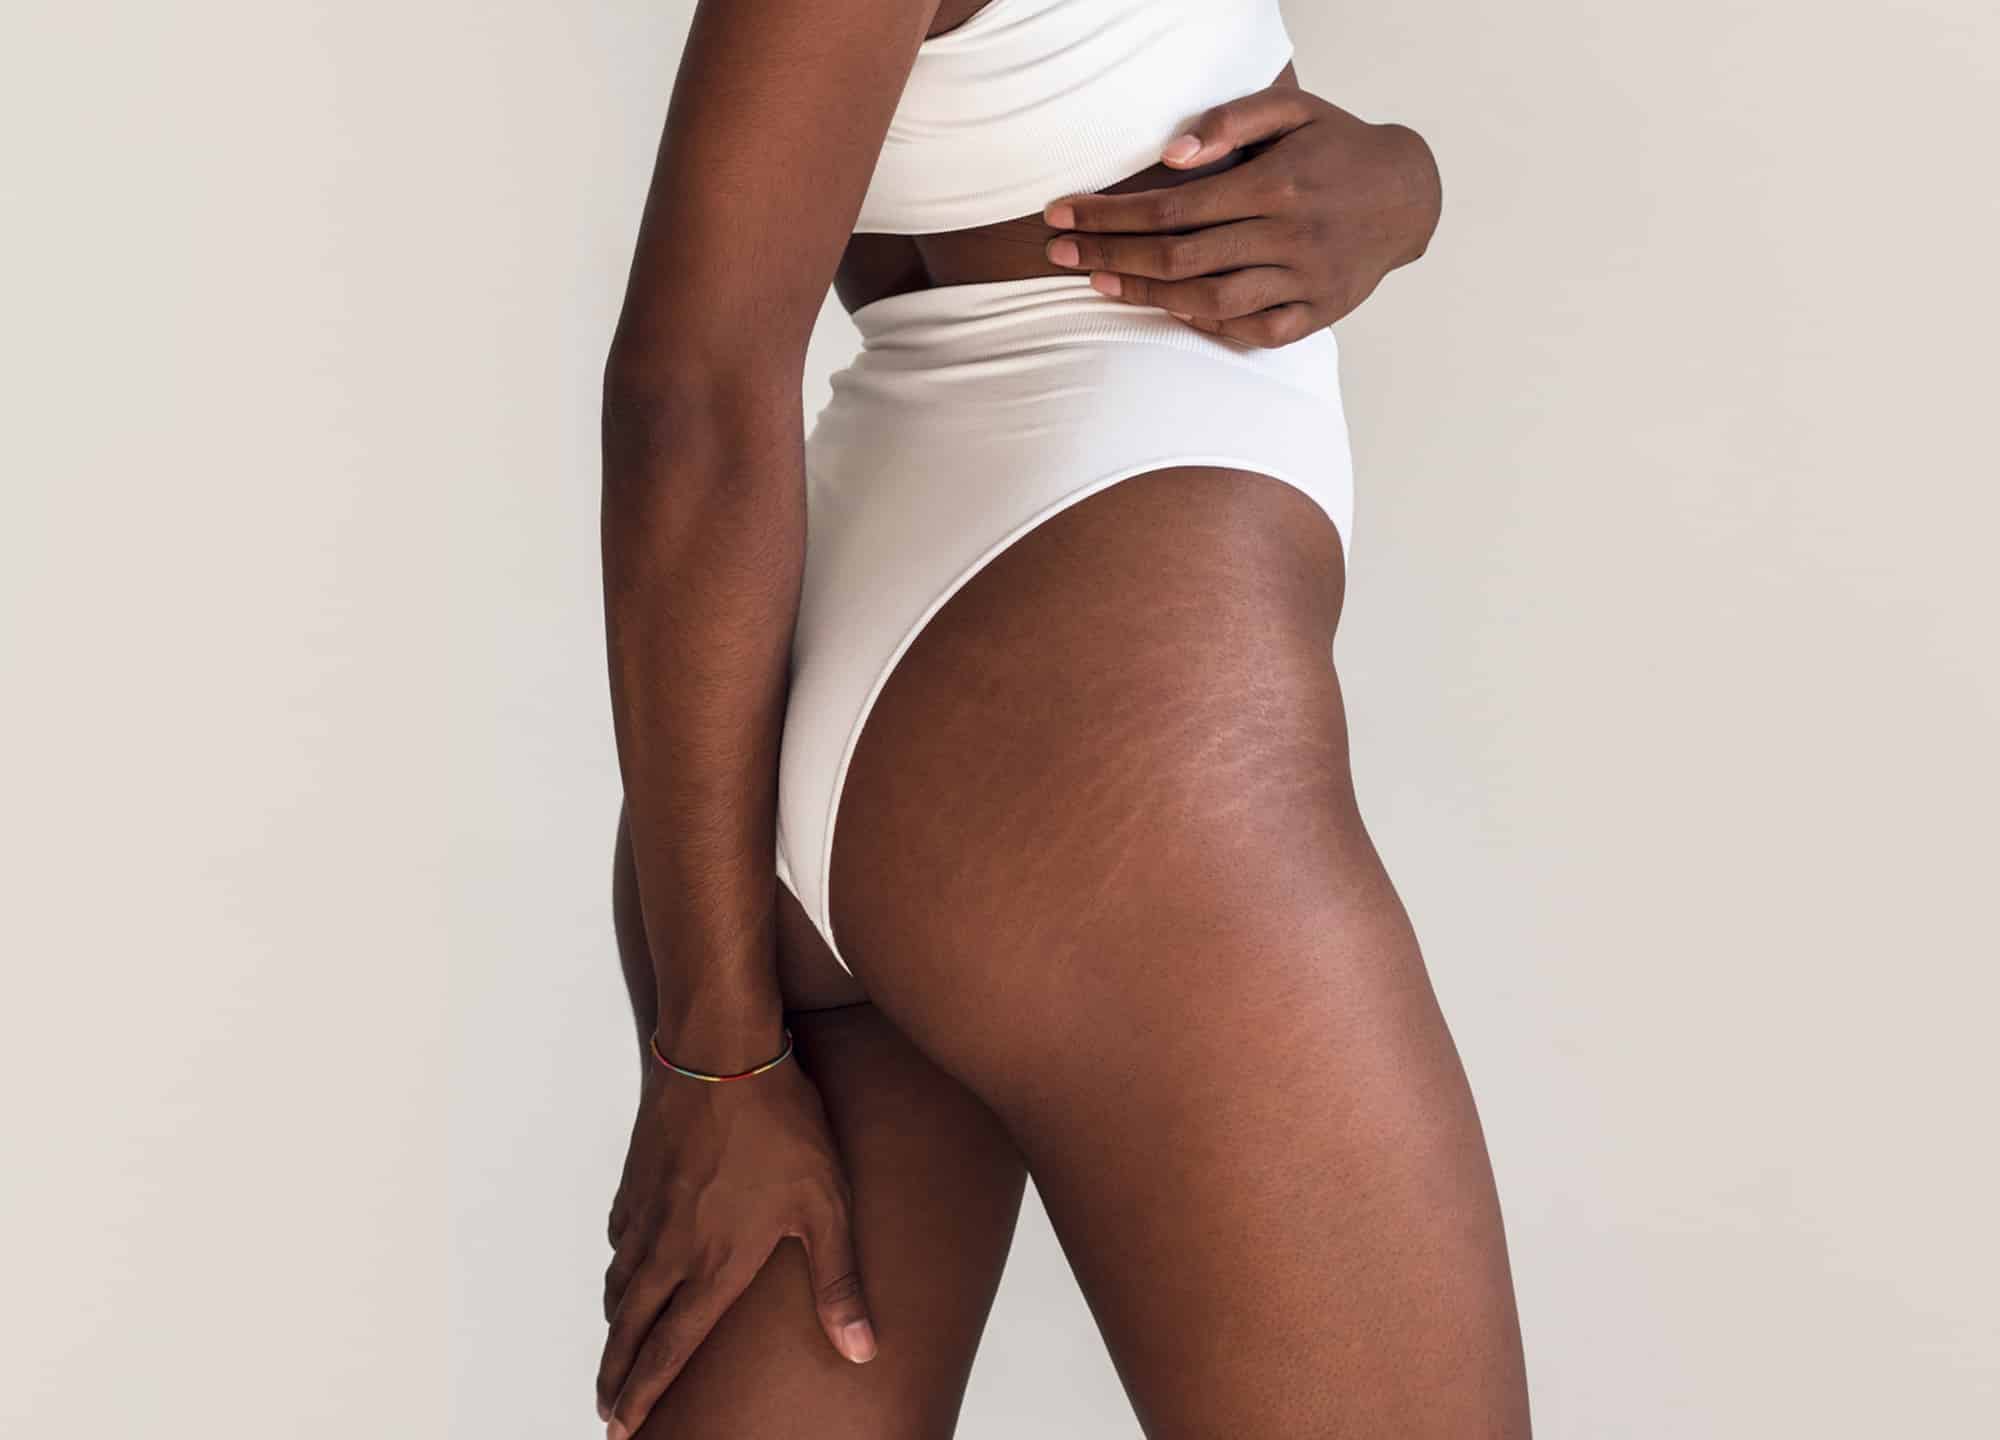 Stretch marks can be troublesome and difficult to treat, so we asked experts their go-to methods for stretch mark treatment.